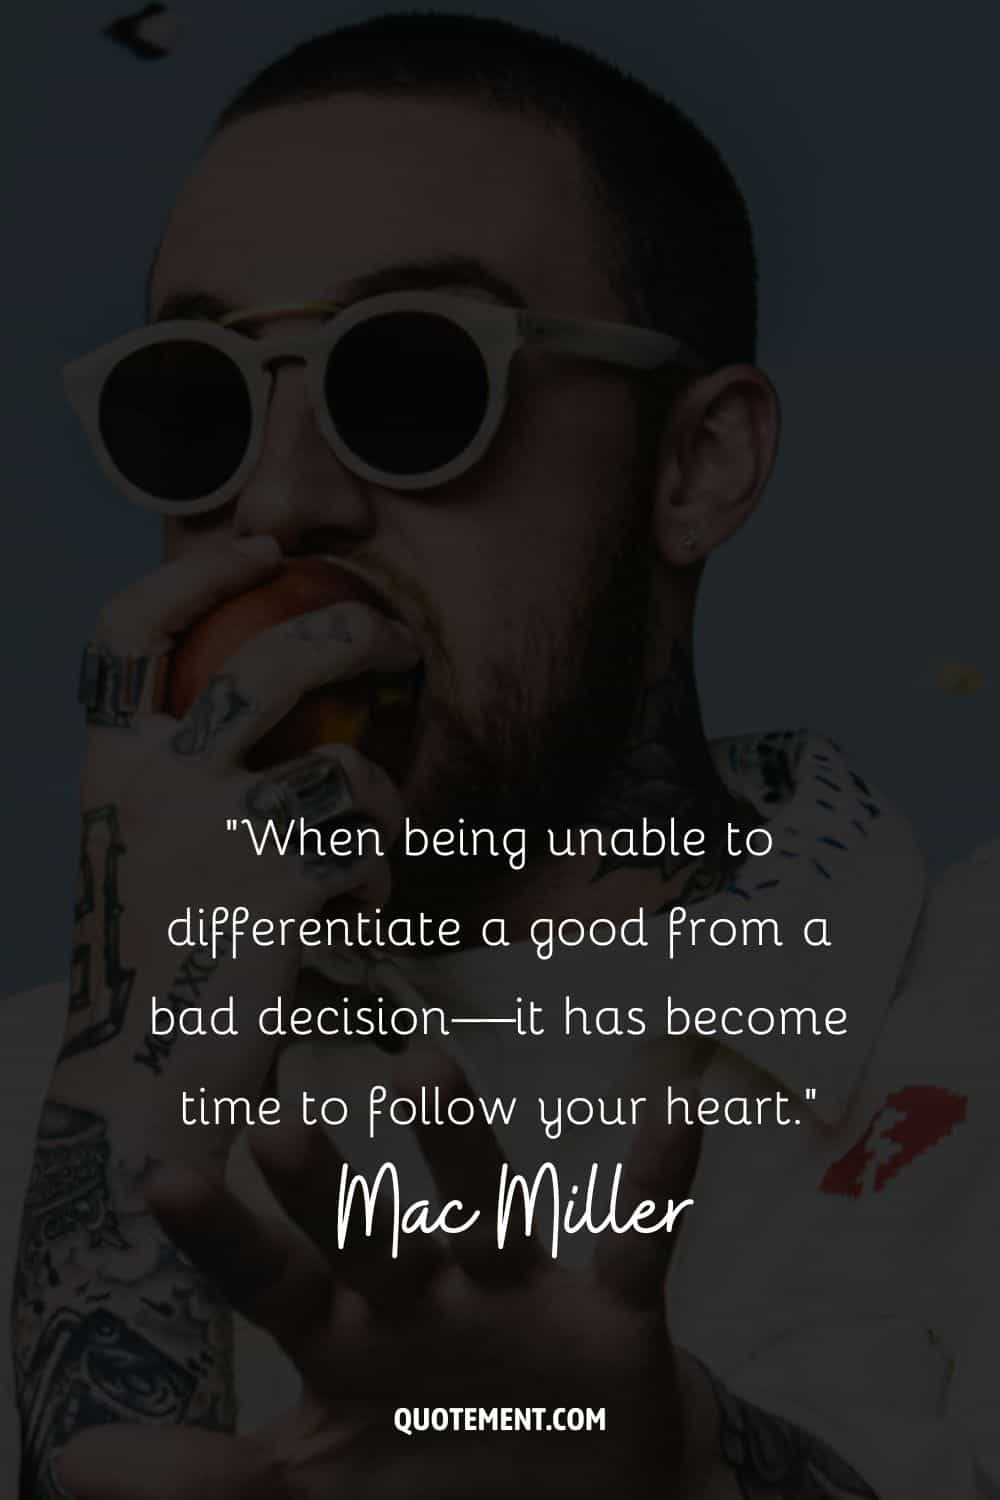 “When being unable to differentiate a good from a bad decision—it has become time to follow your heart.” – Mac Miller